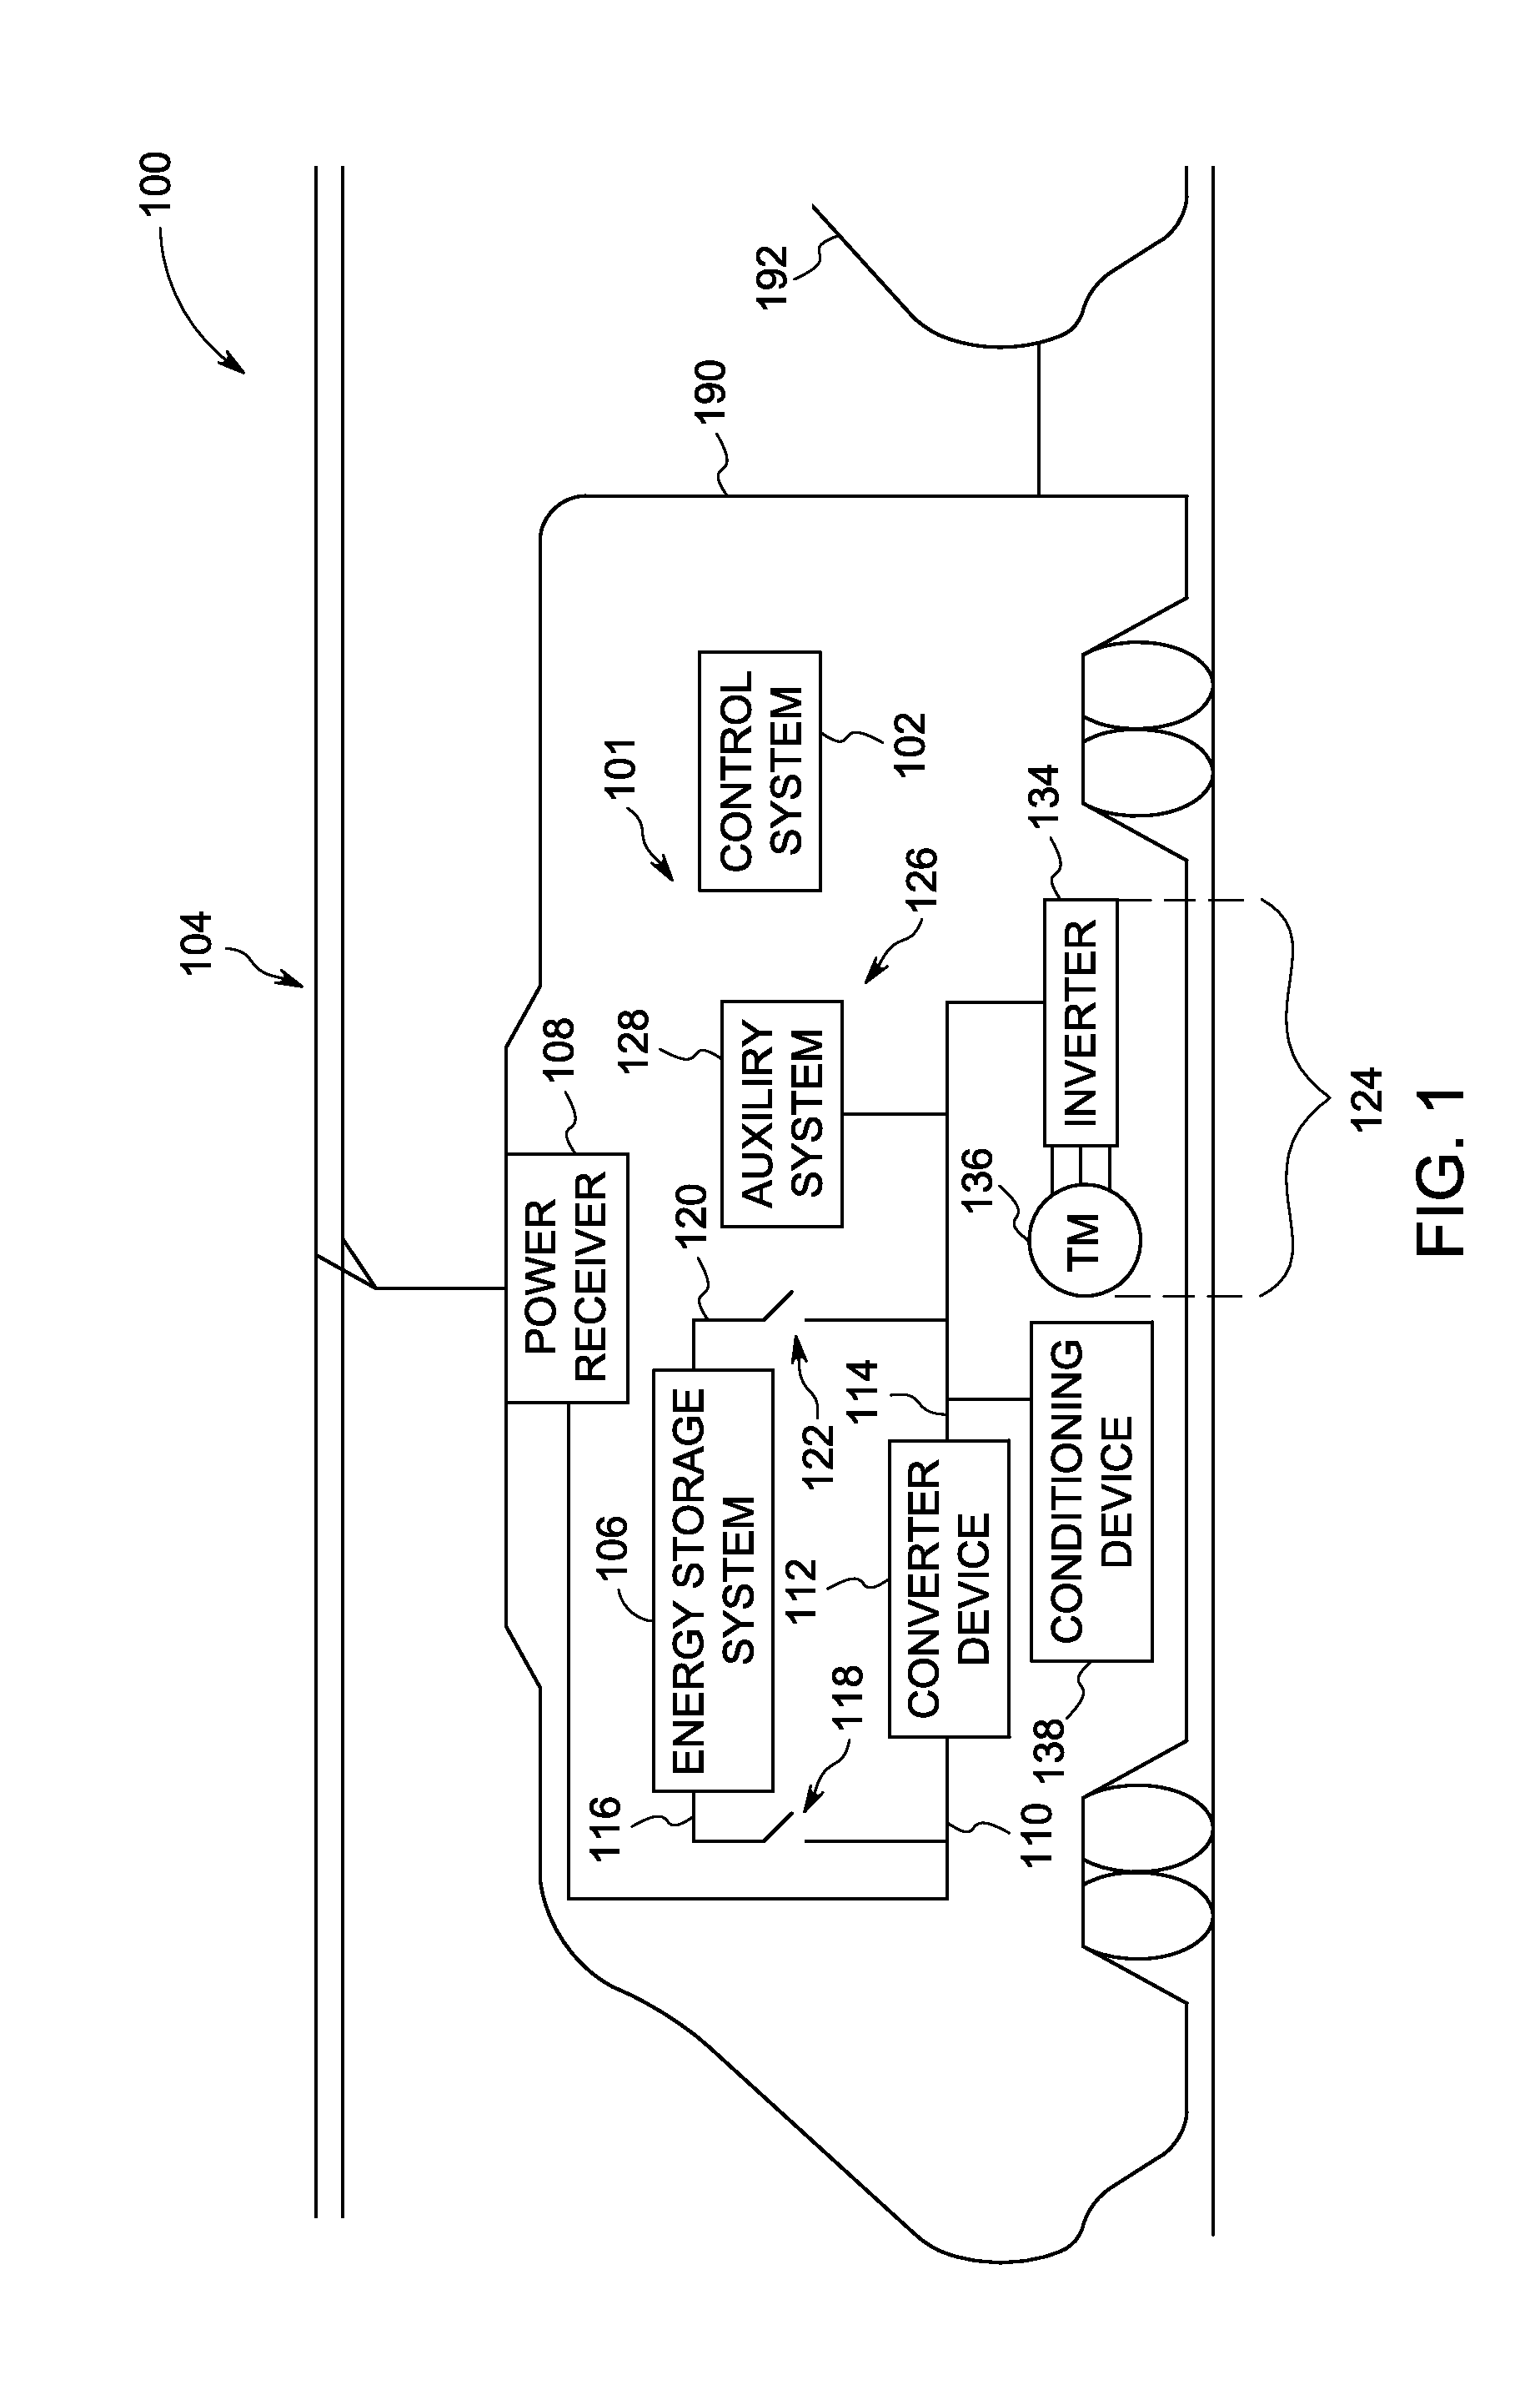 System and method for operating a hybrid vehicle system